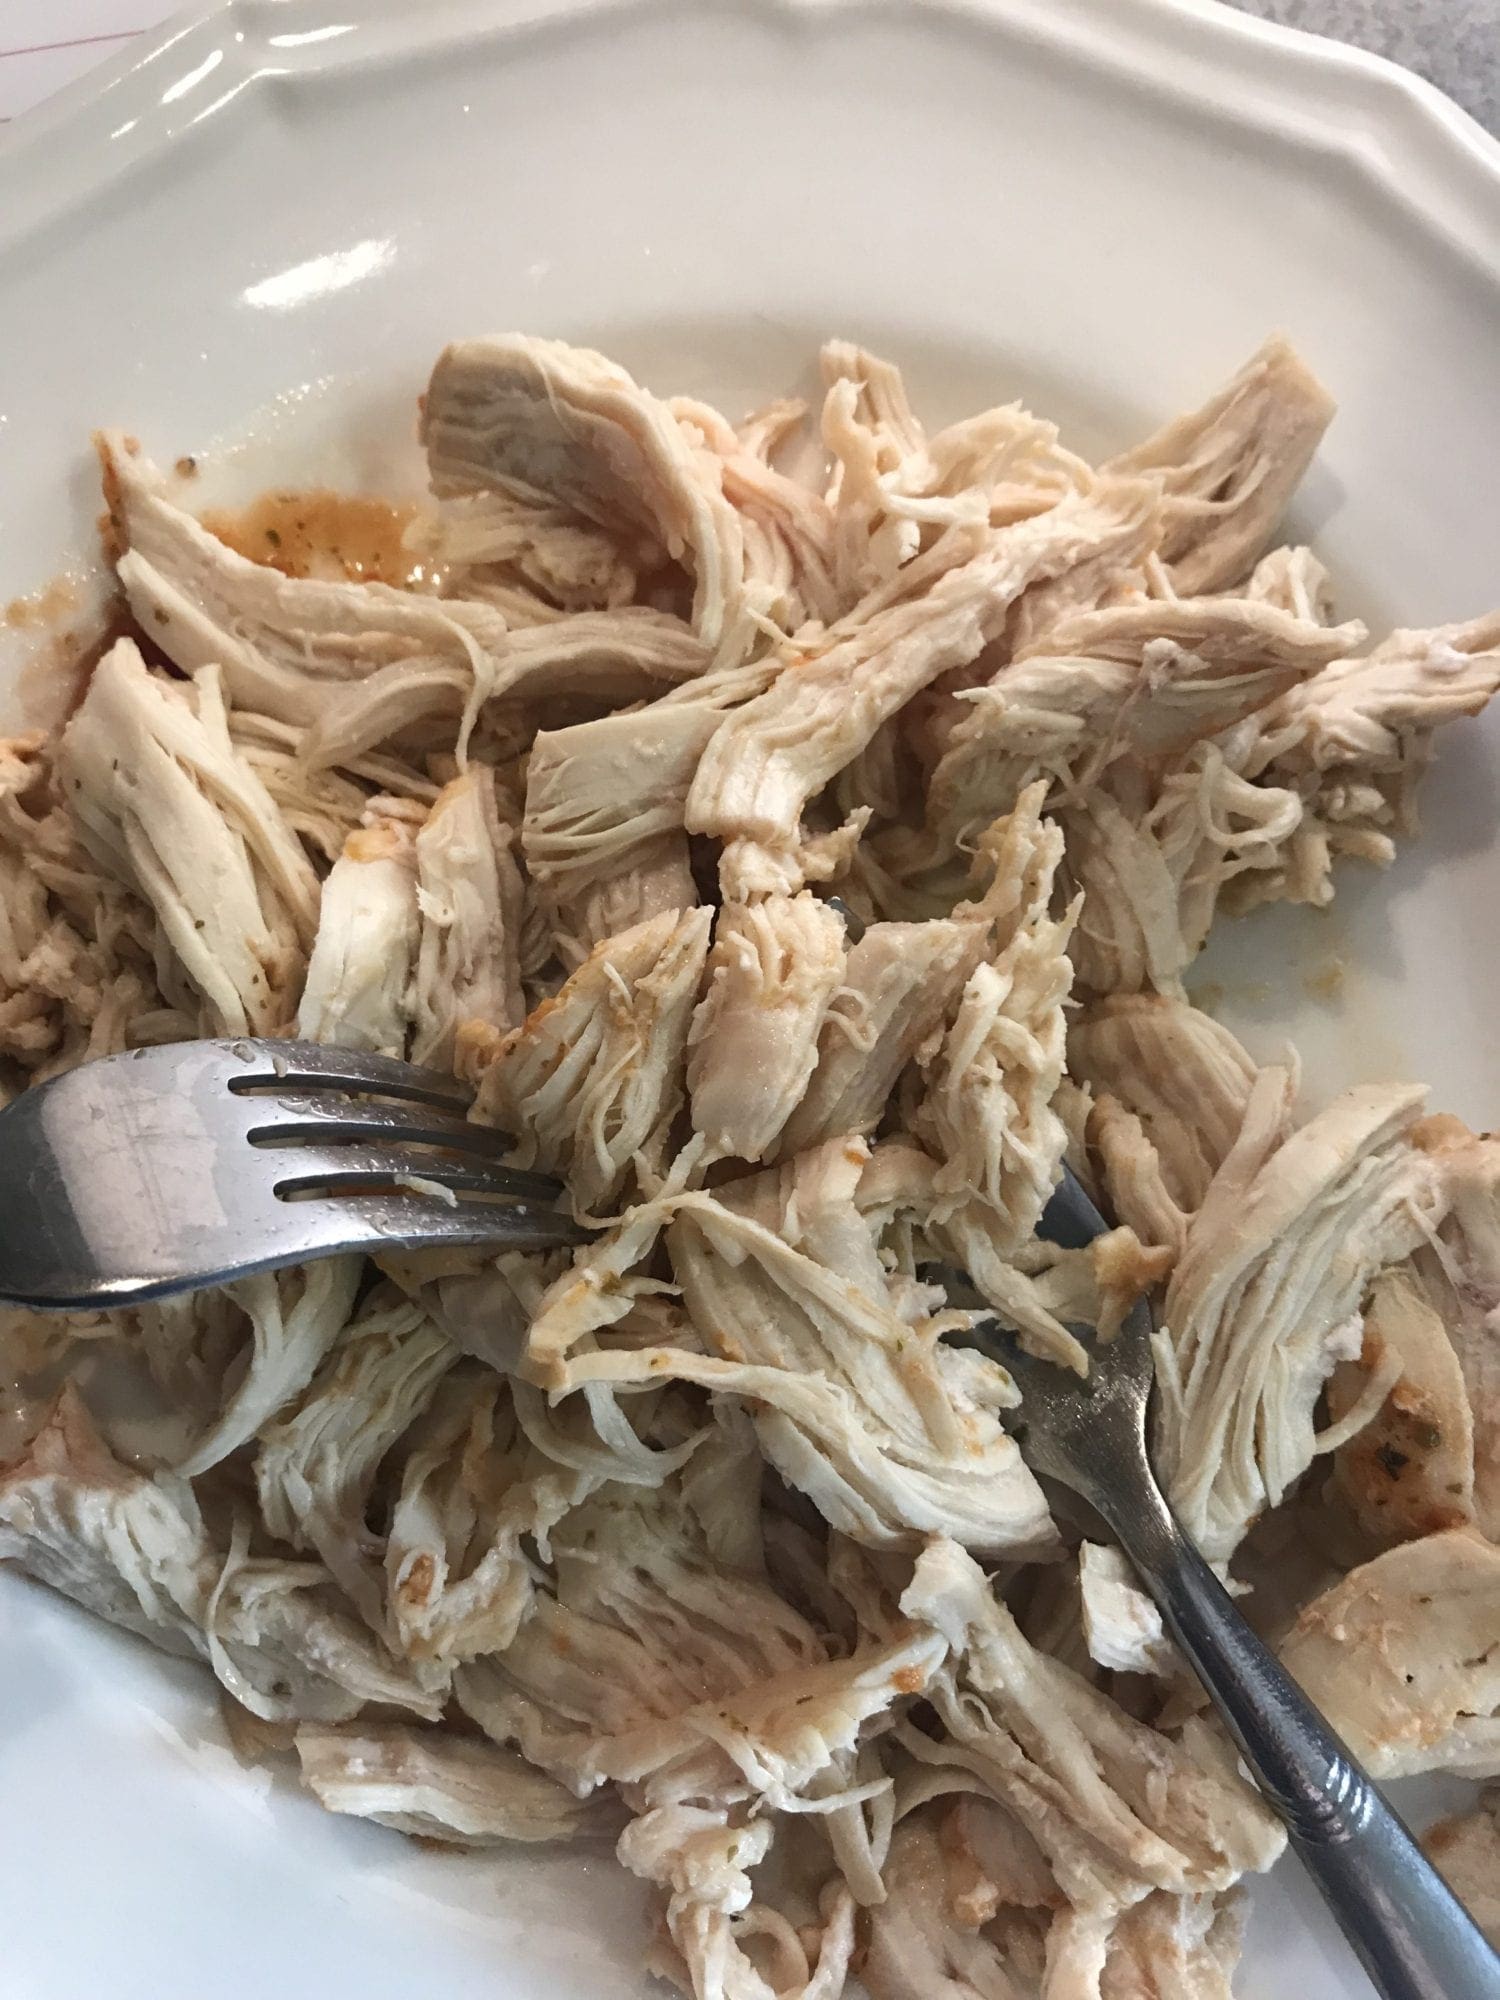 Shred chicken cooked in the Insant Pot or slow cooker with two forks.